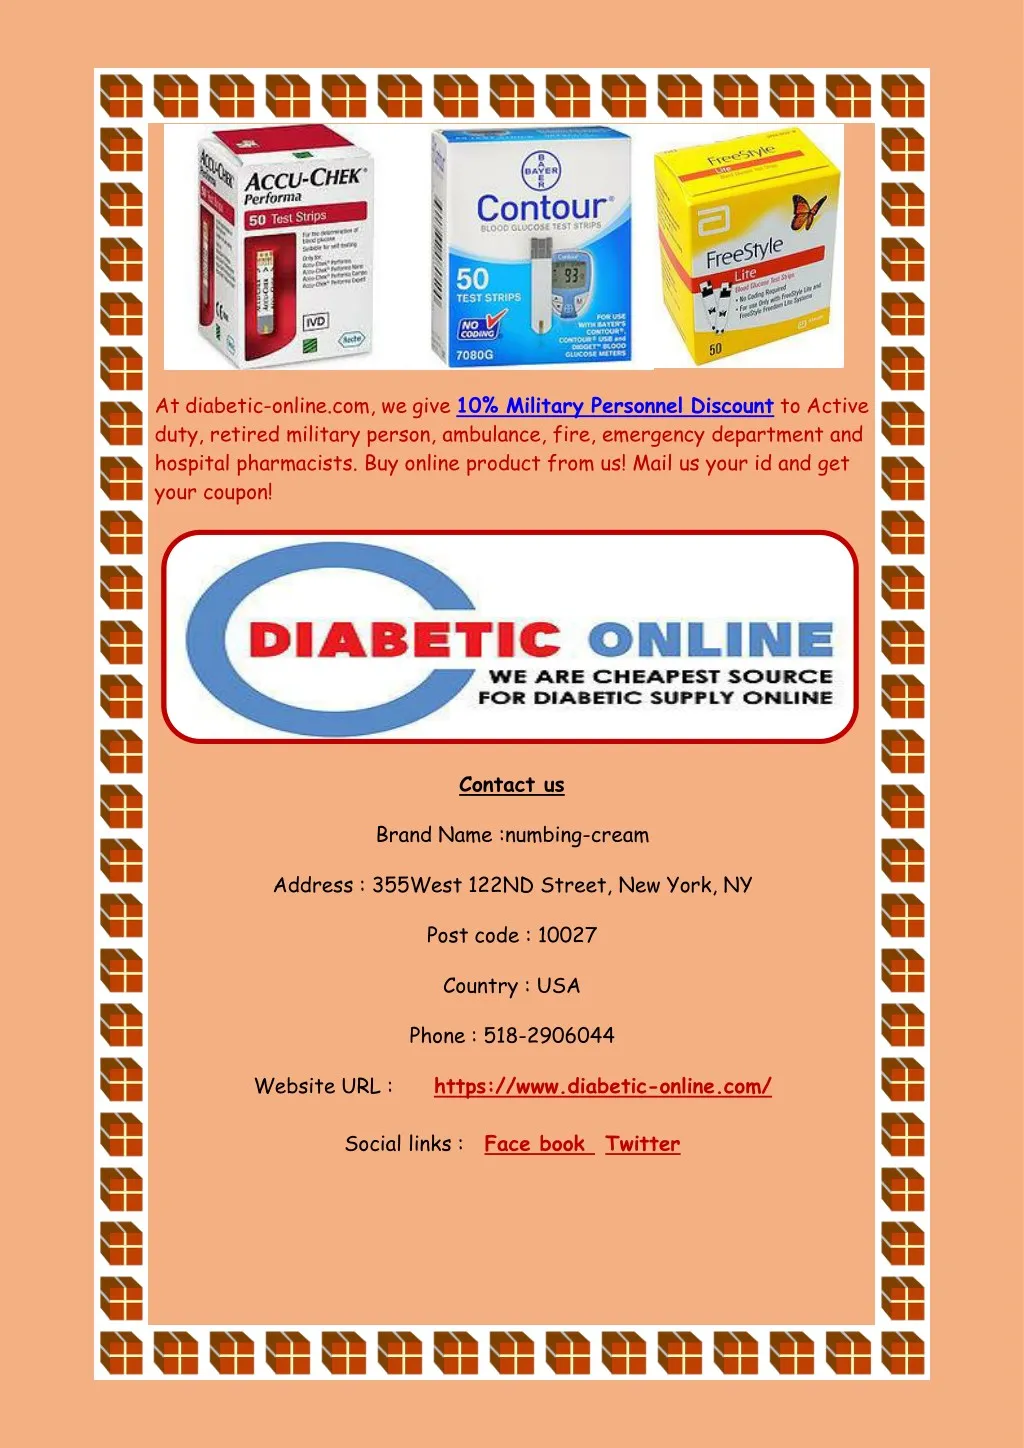 at diabetic online com we give 10 military